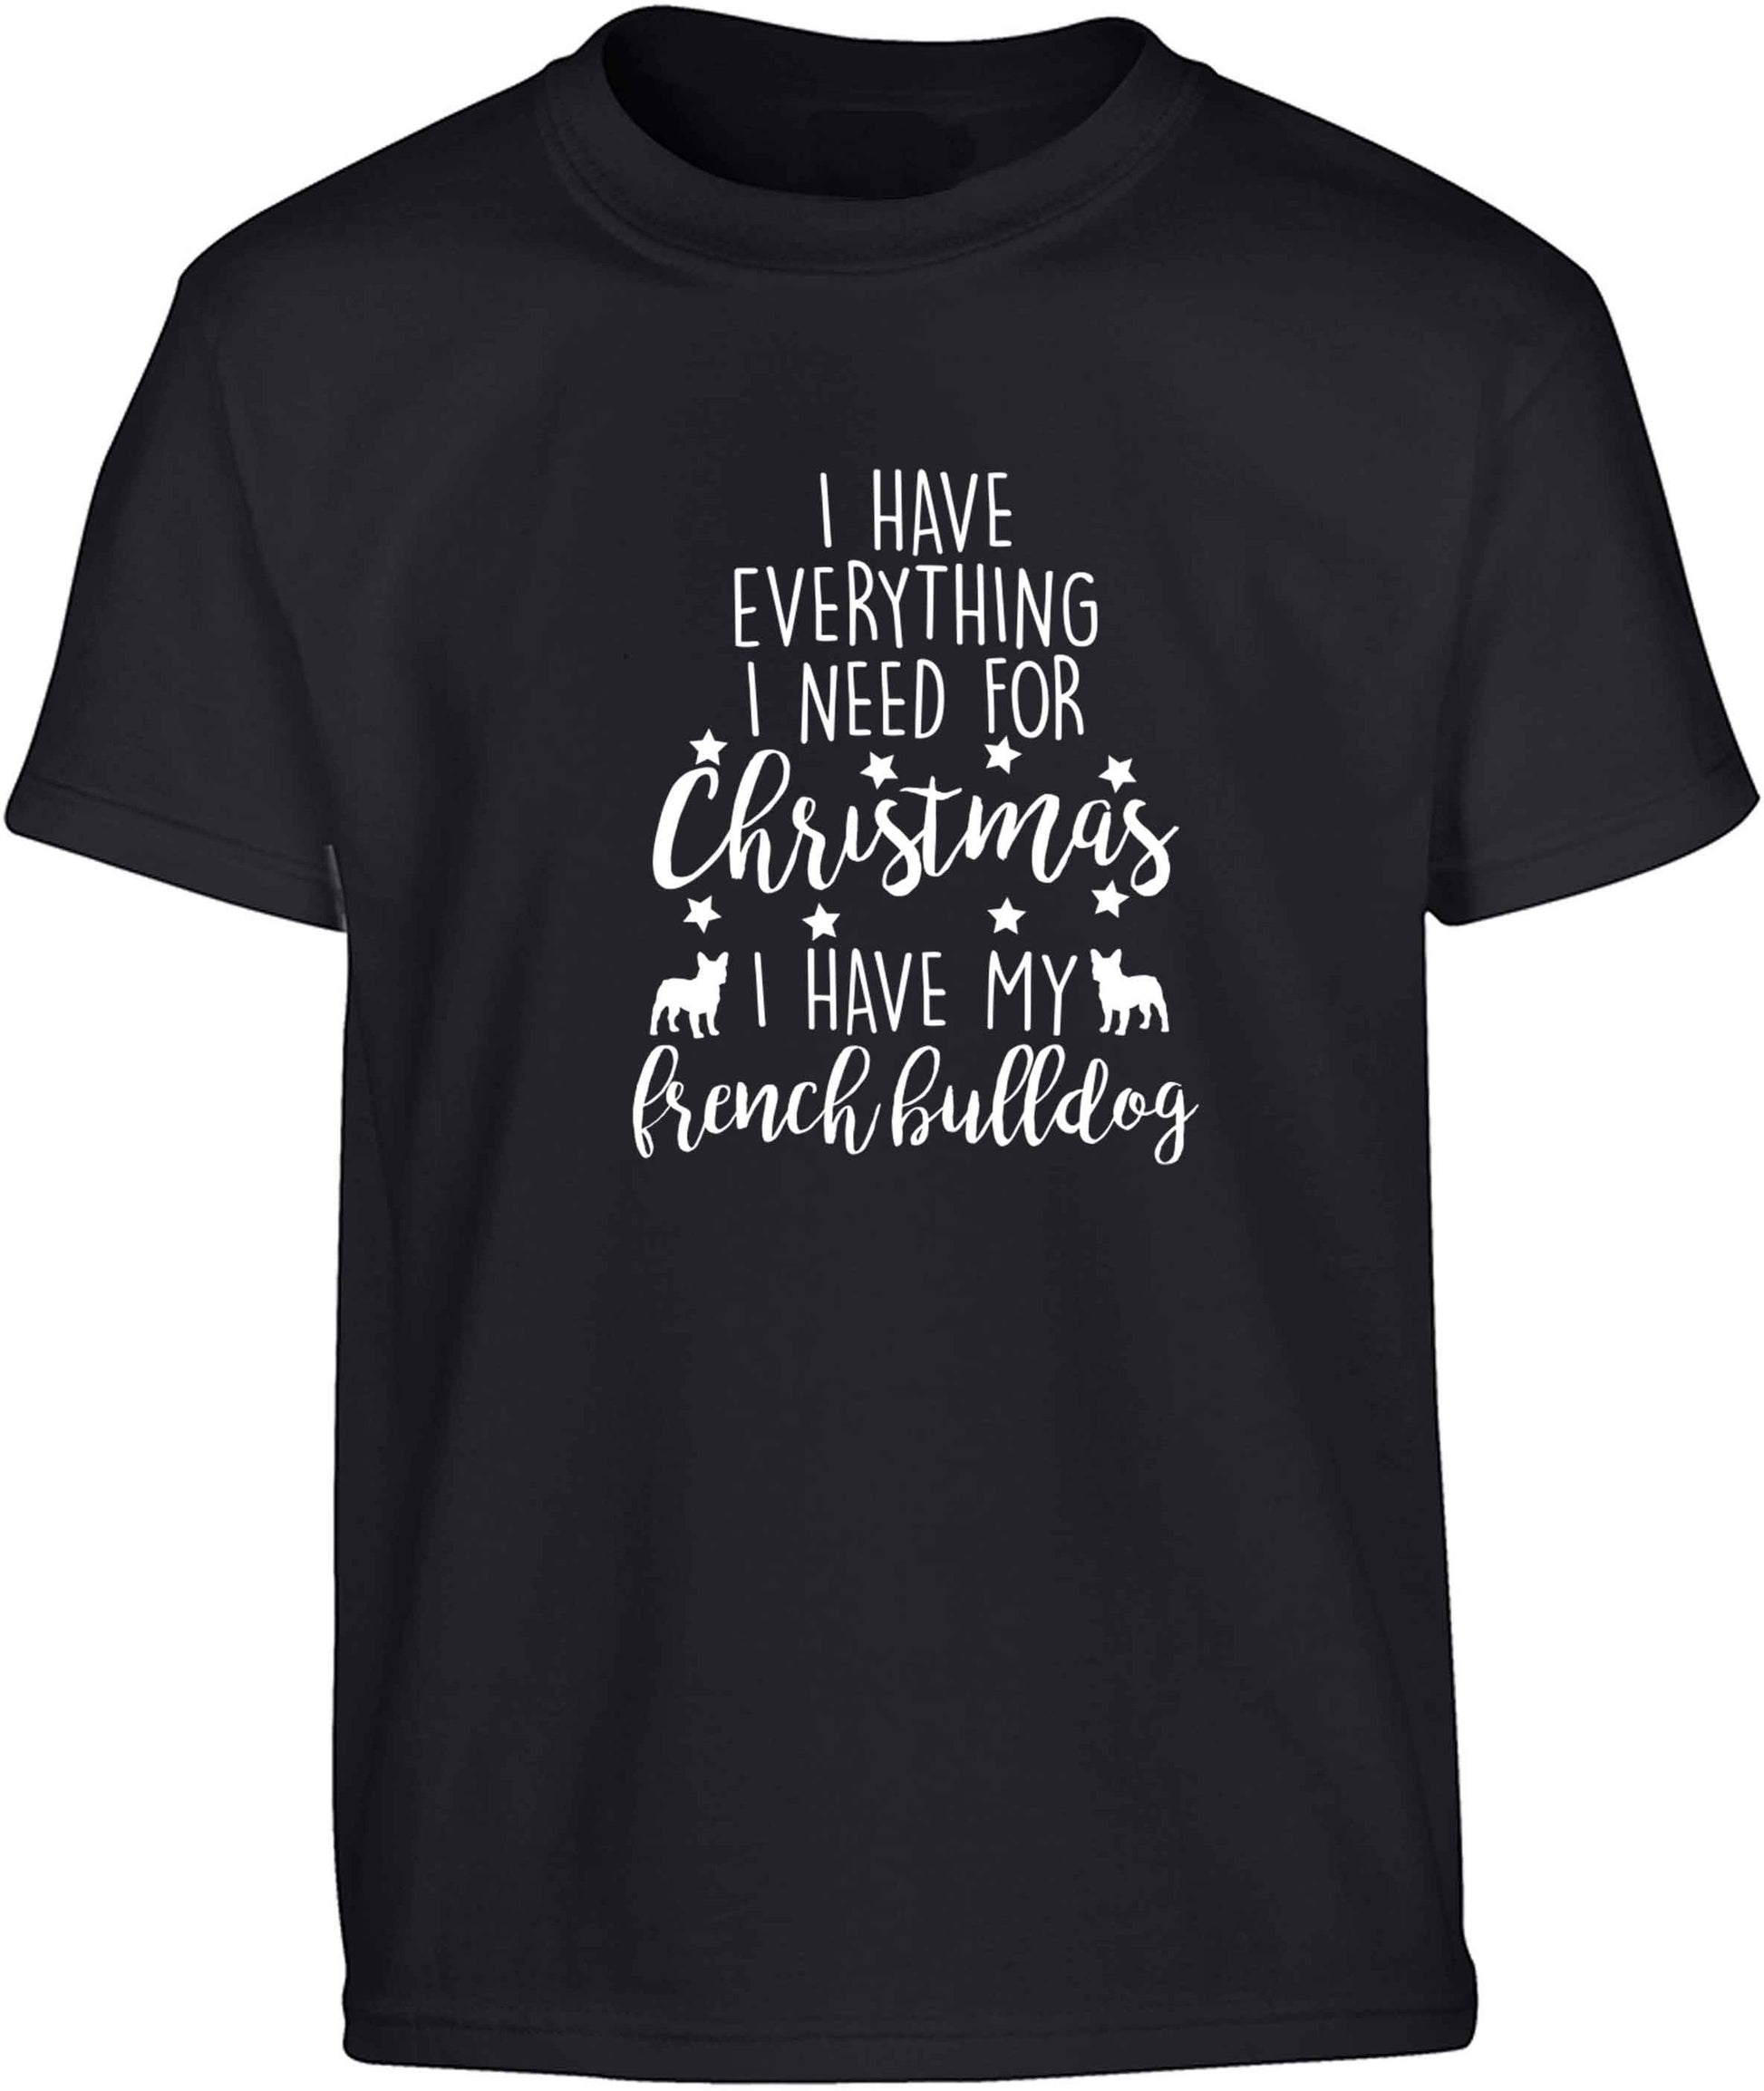 I have everything I need for Christmas I have my french bulldog Children's black Tshirt 12-13 Years